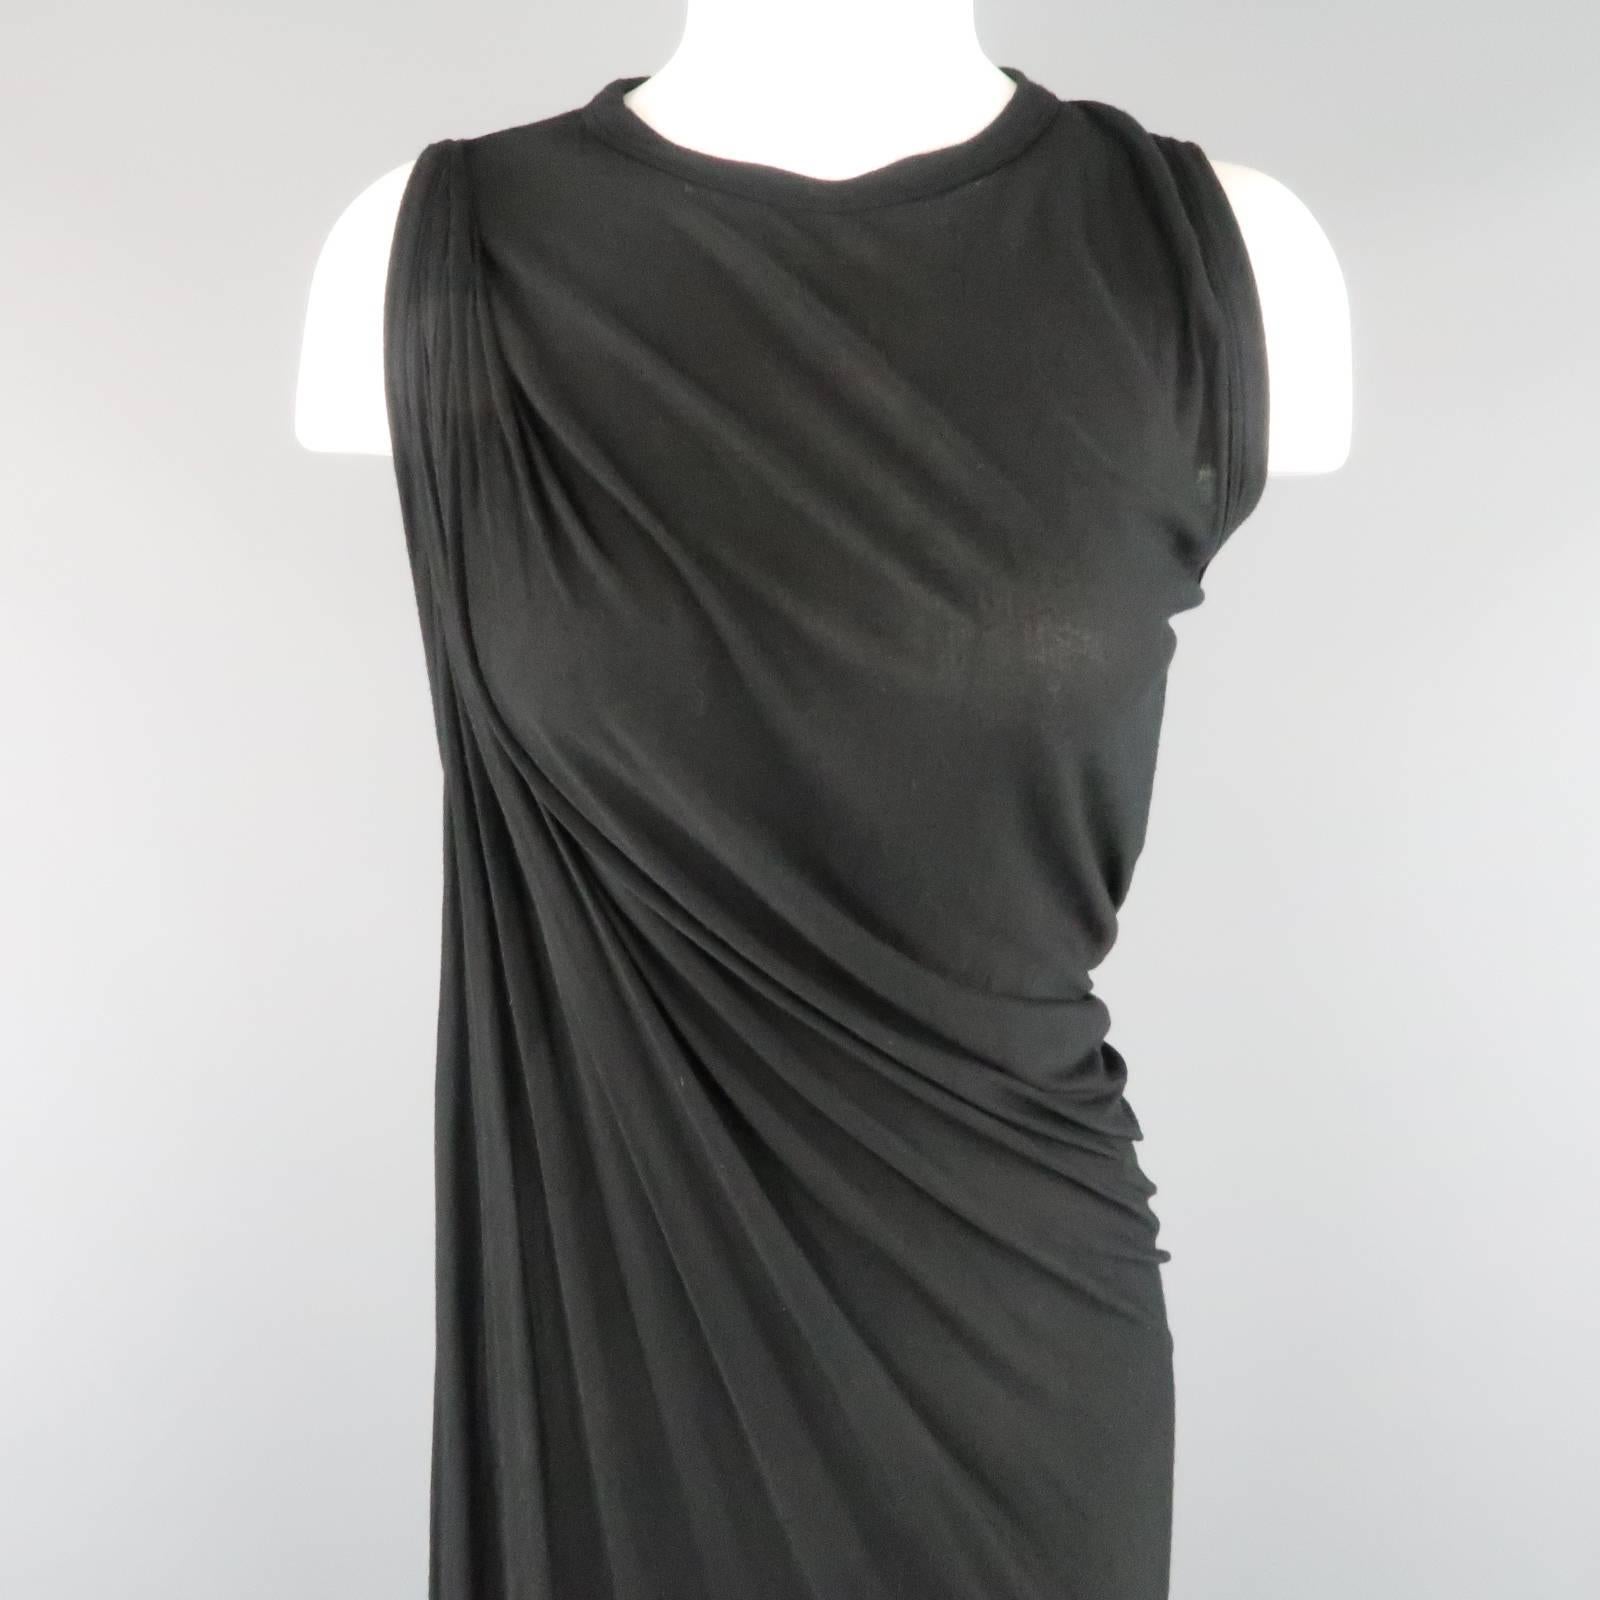 RICK OWENS T-shirt dress comes in a light weight, sheer jersey and features a round neckline, racer back, and asymmetrical draped sheath construction. Small holes. As-Is. Made in Italy.
 
Good Pre-Owned Condition.
Marked: US 10
 
Measurements:
